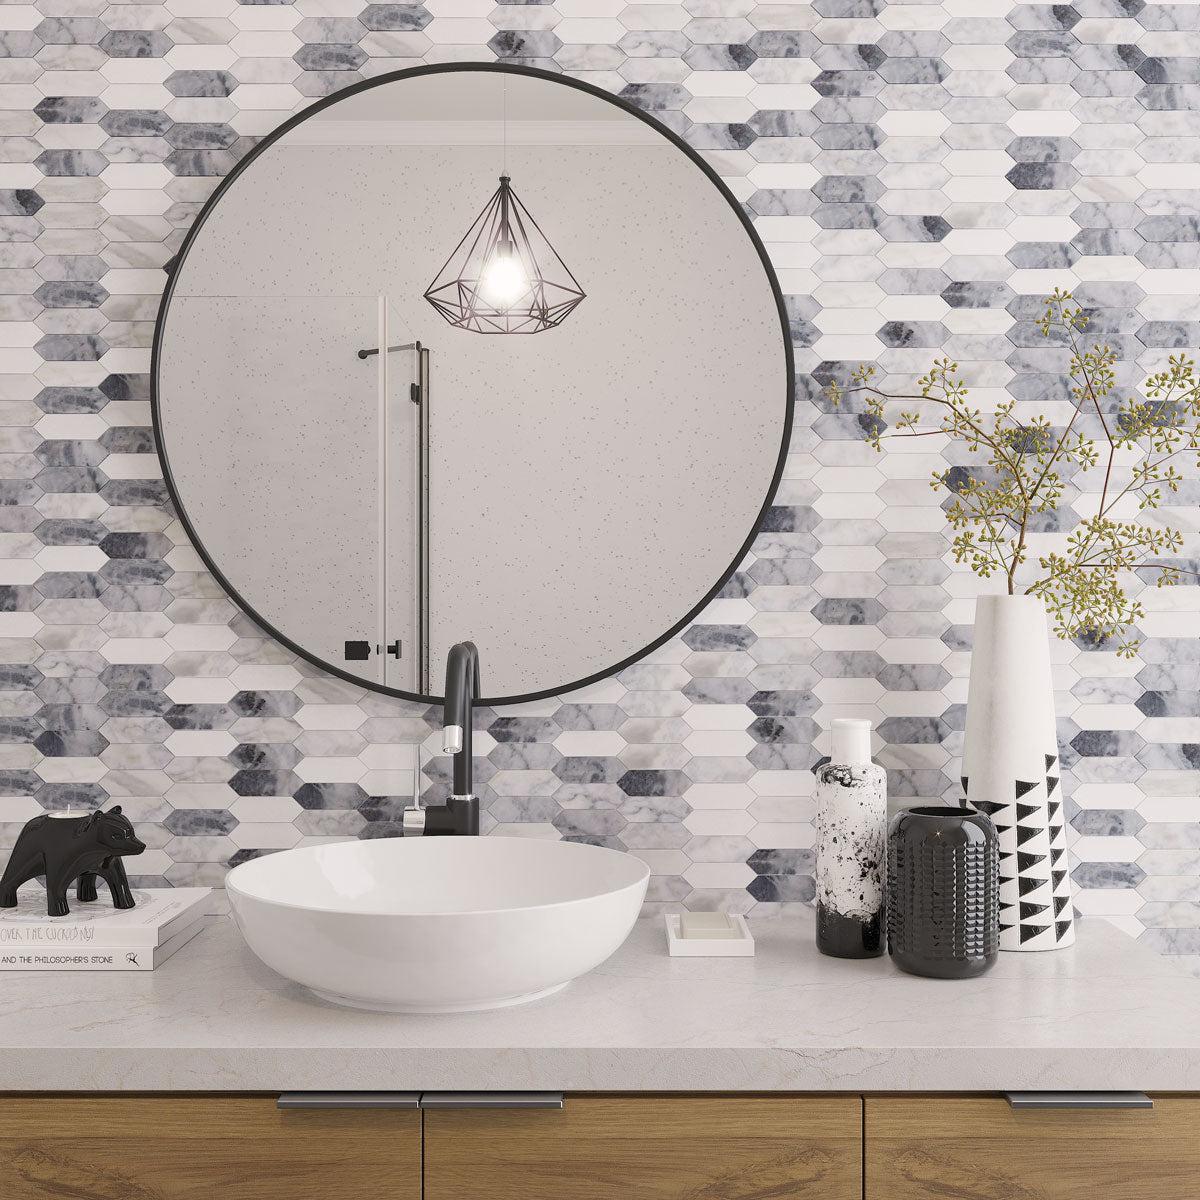 Calacatta Bluette Marble Picket Tile bathroom in blue, gray, and white